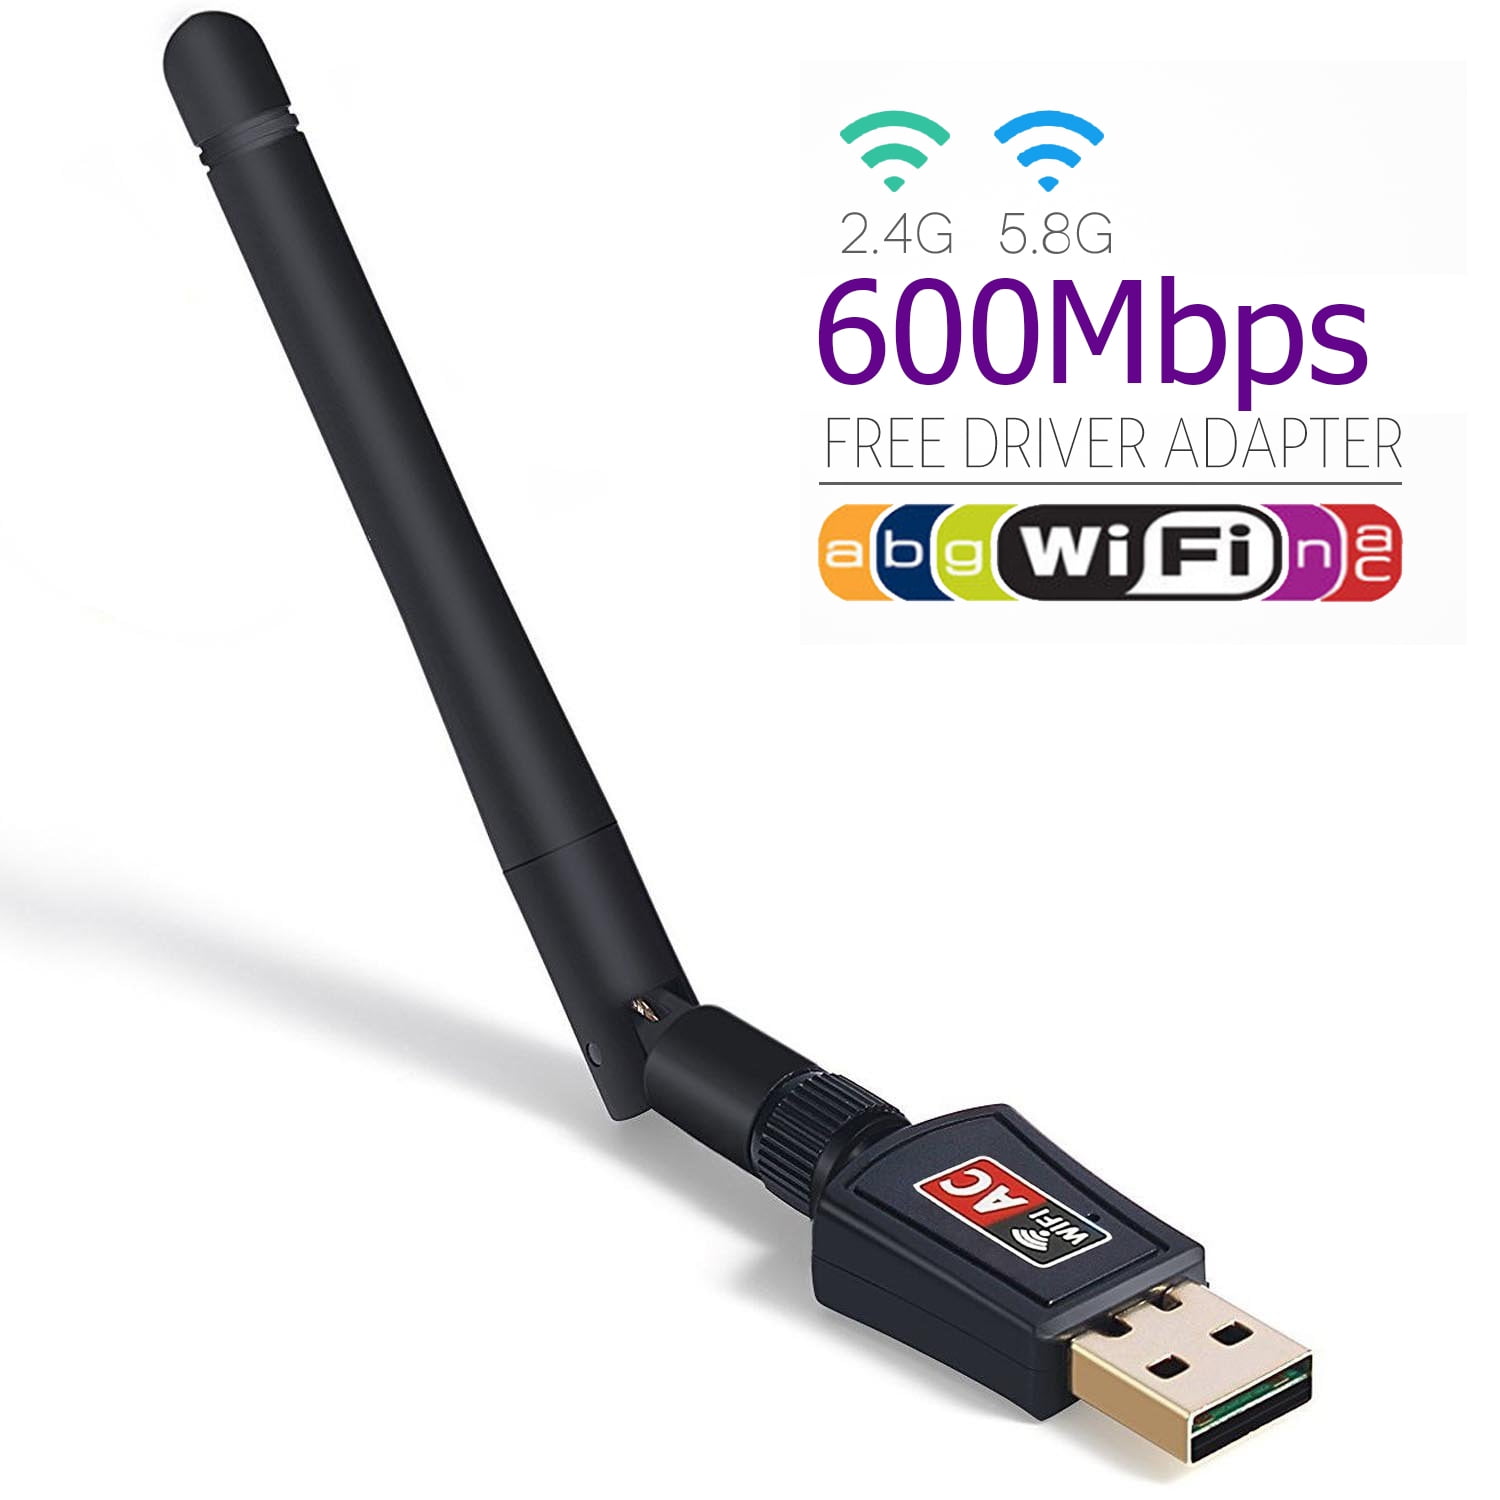 EEEkit Dual Band USB wifi Adapter, 600 Mbps 5GHz/2.4GHz WIFI USB Adapter 802.11ac w/ Antenna Wireless Network Dongle for PC Laptop